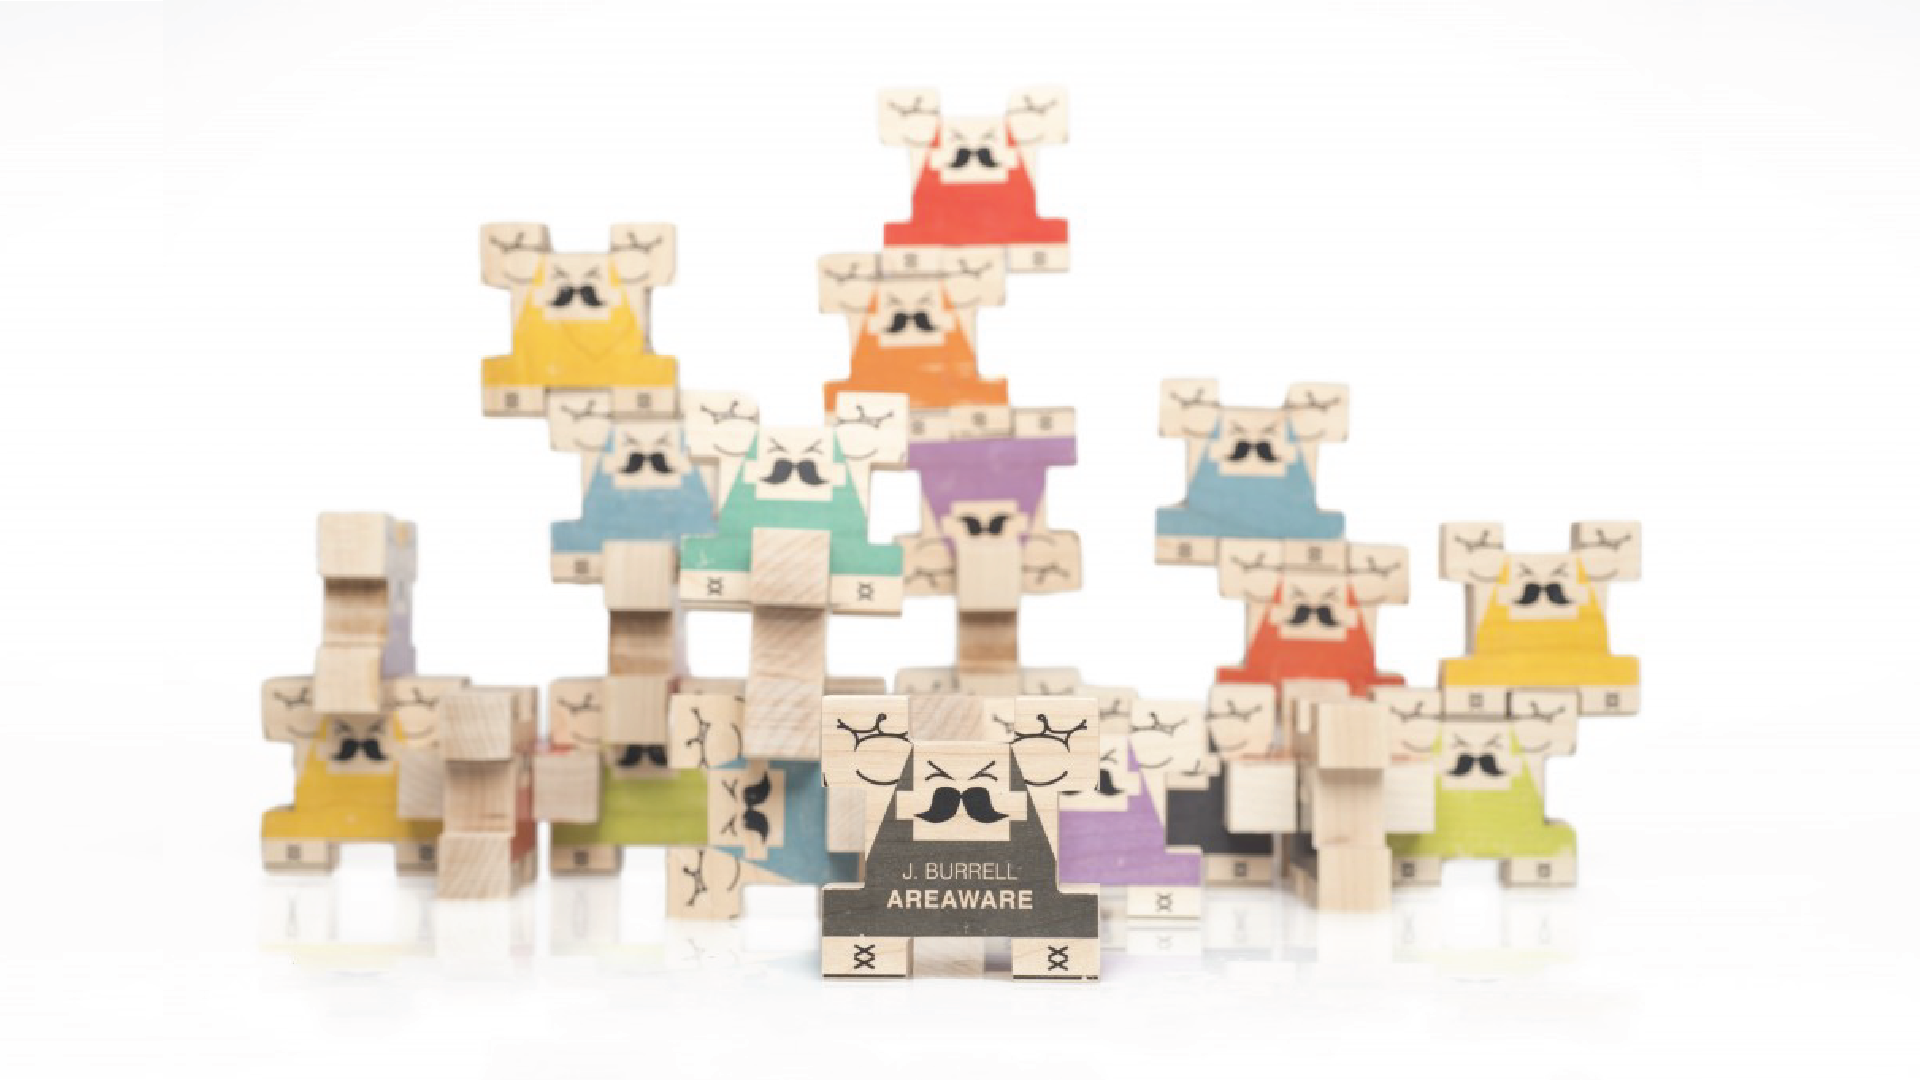 Play set of ten wooden building block men stacked together in a multitude of ways.